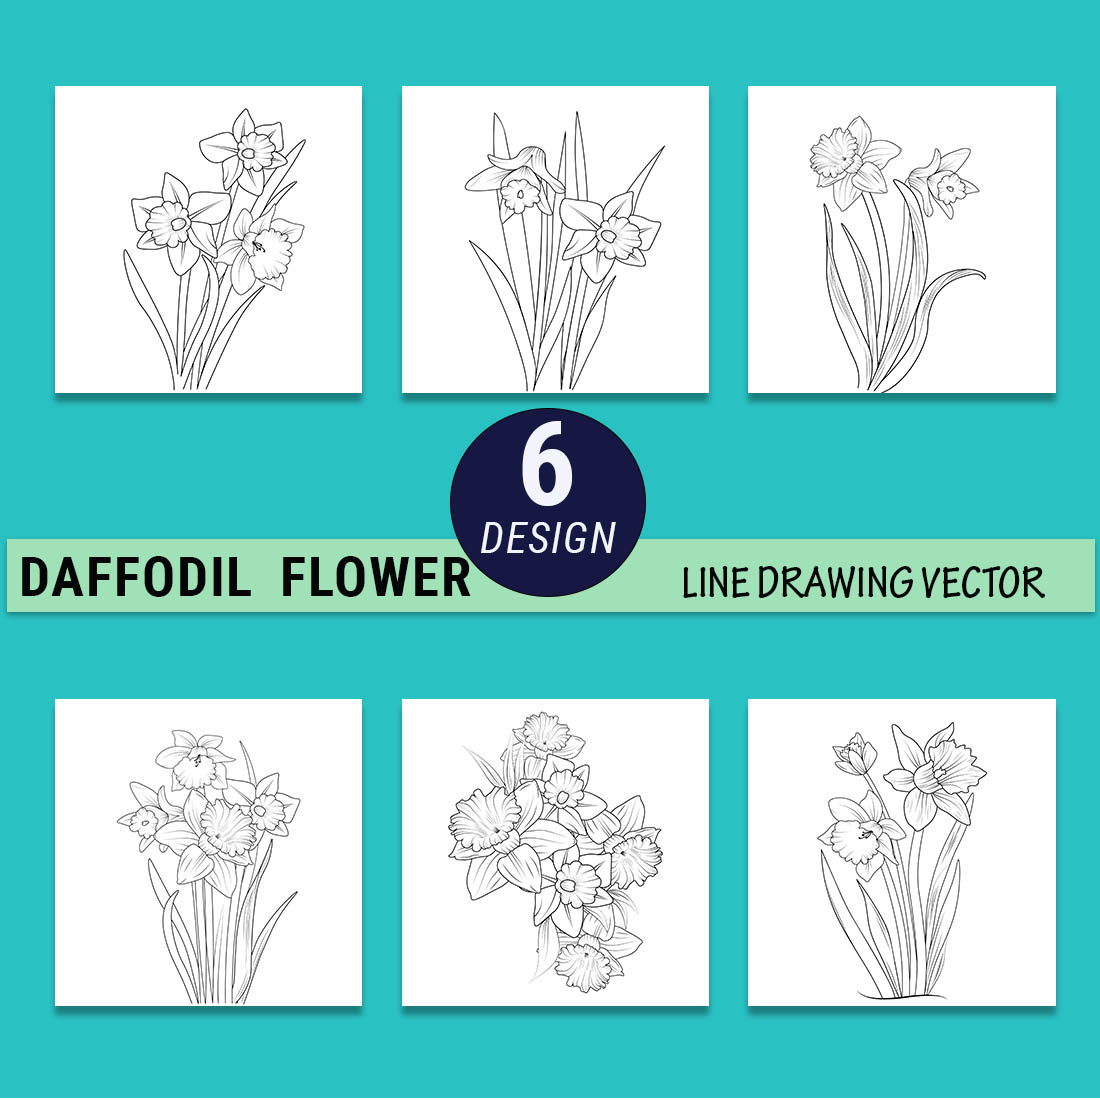 Daffodil flower, daffodil, daffodil line art, daffodil flower coloring pages, daffodil drawings, yellow daffodil, daffodil outline, scientific daffodil botanical illustration preview image.